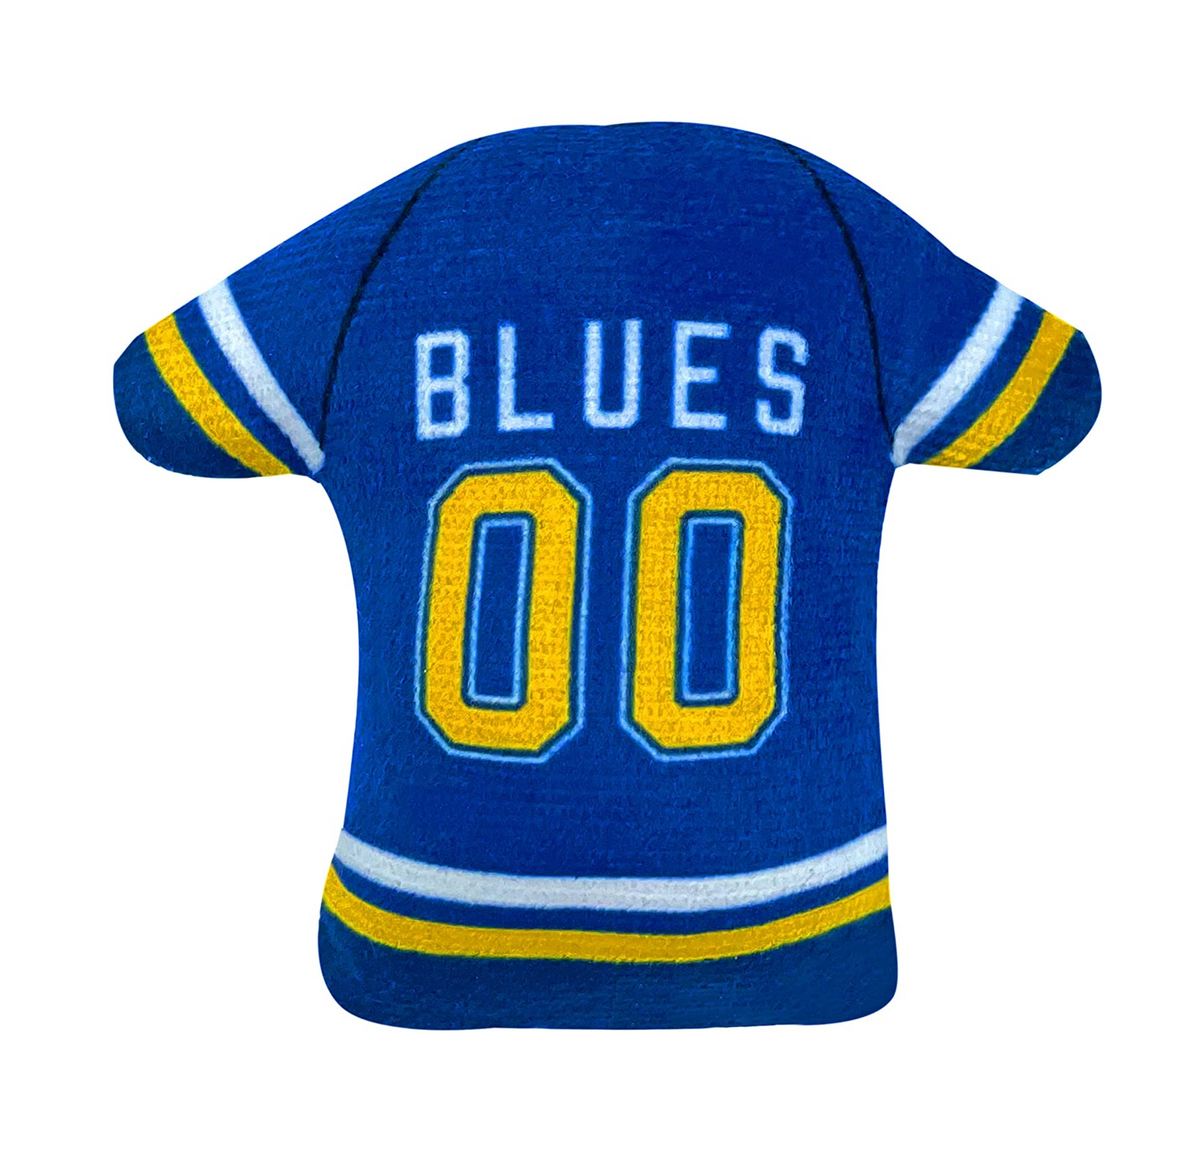 St Louis Blues 3 piece Catnip Toy Set - 3 Red Rovers